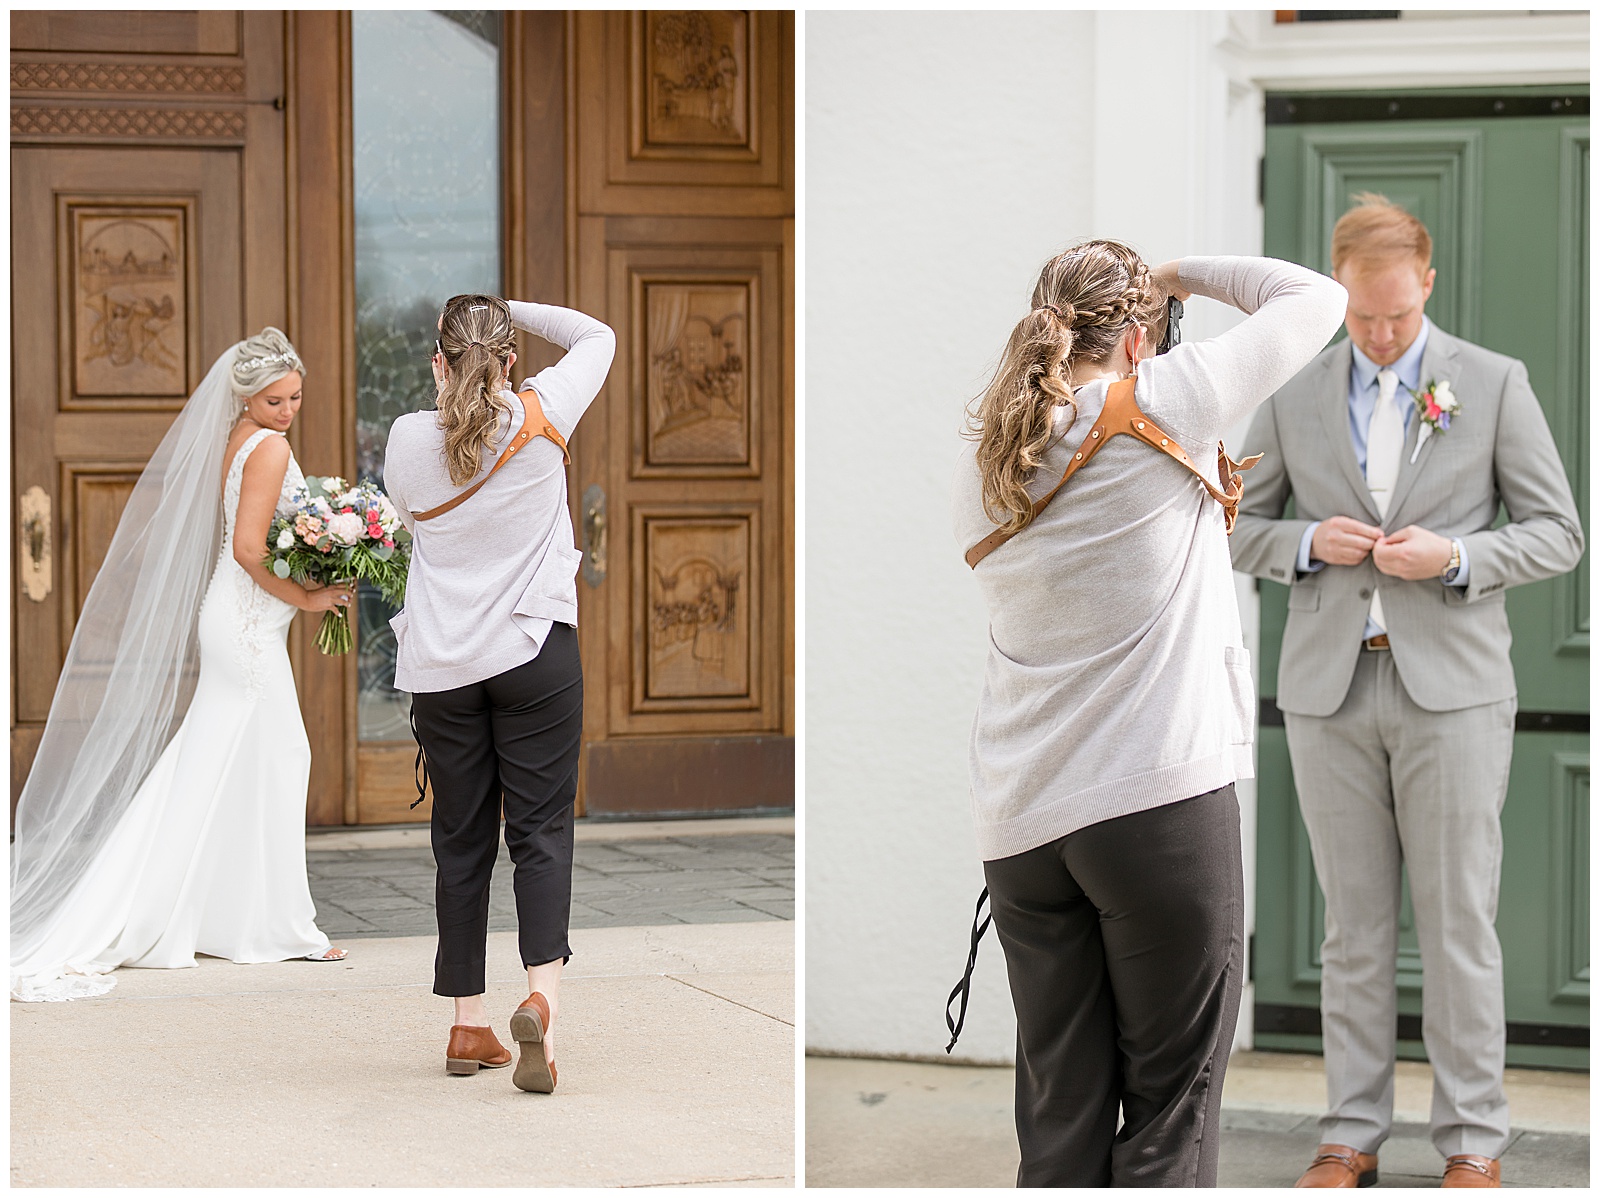 back of photographer as she is snapping photos of bride wearing long white veil and white gown by large wooden church doors